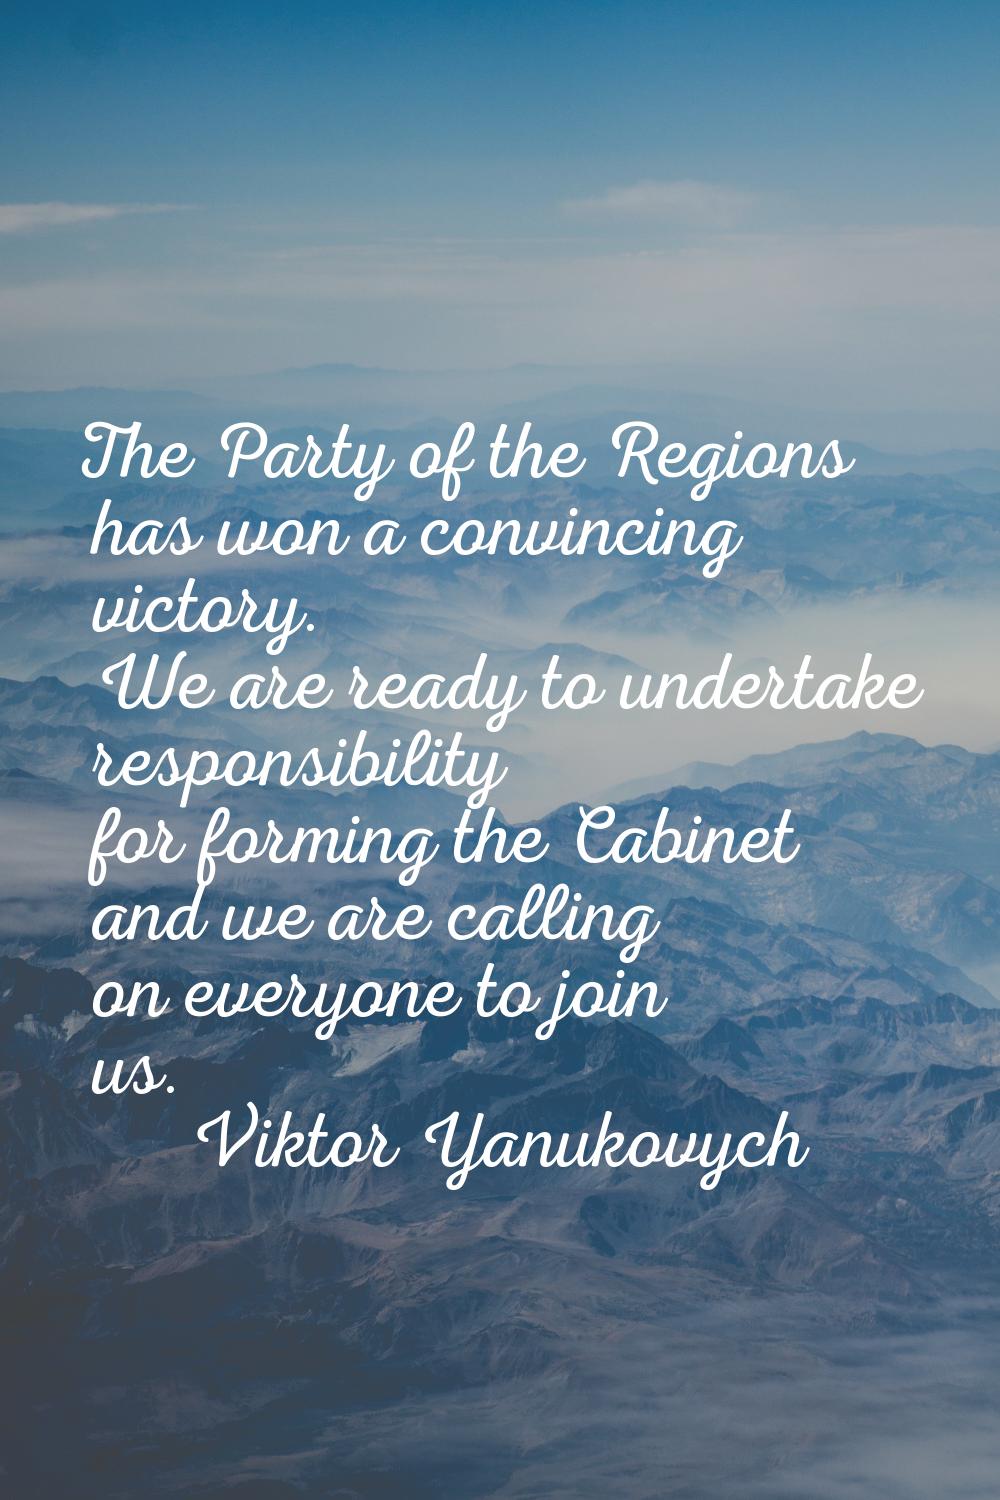 The Party of the Regions has won a convincing victory. We are ready to undertake responsibility for